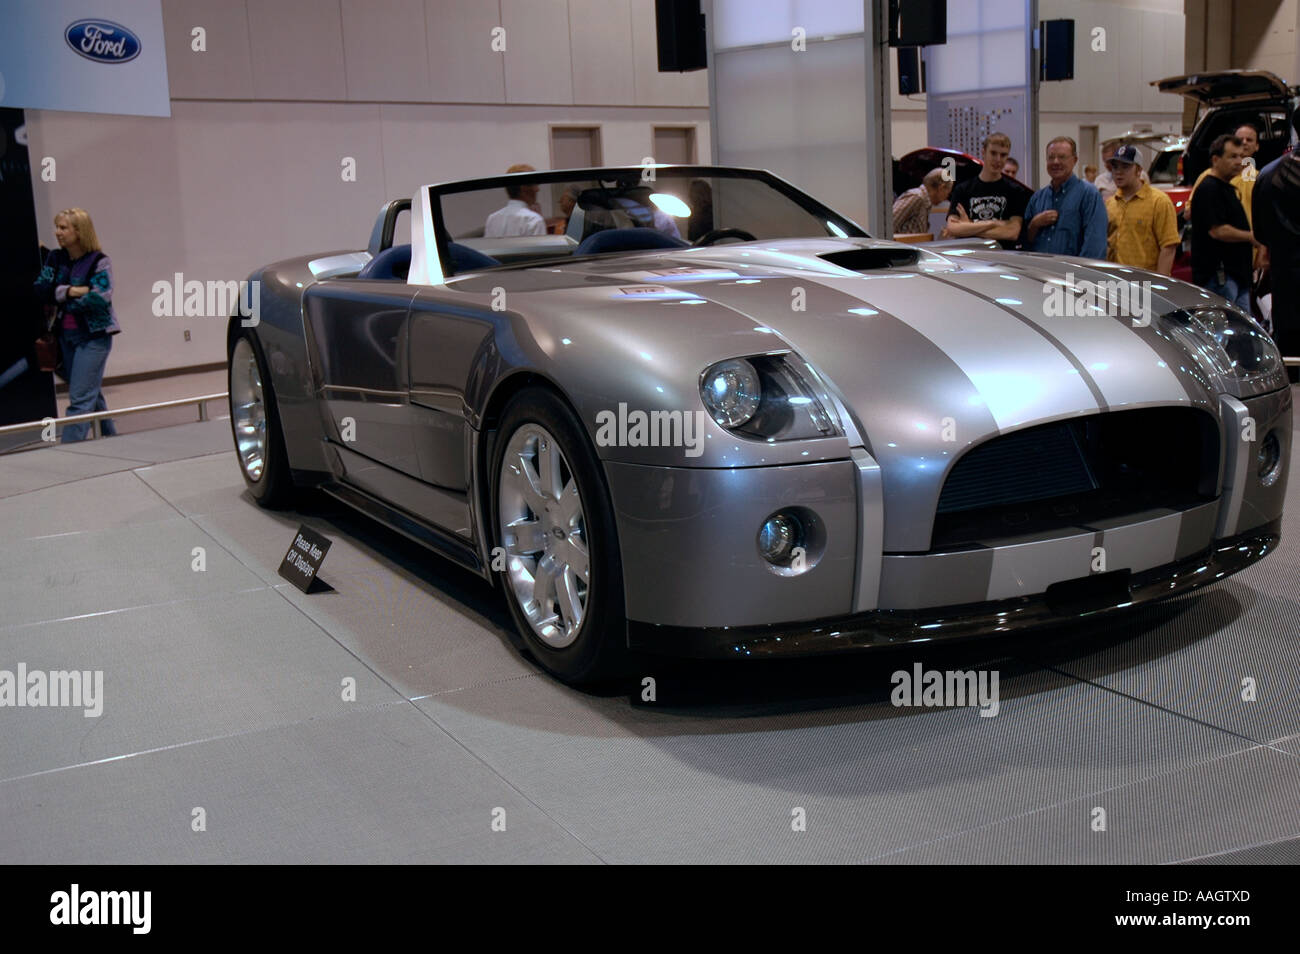 Ford Shelby Cobra Concept Car Stock Photo